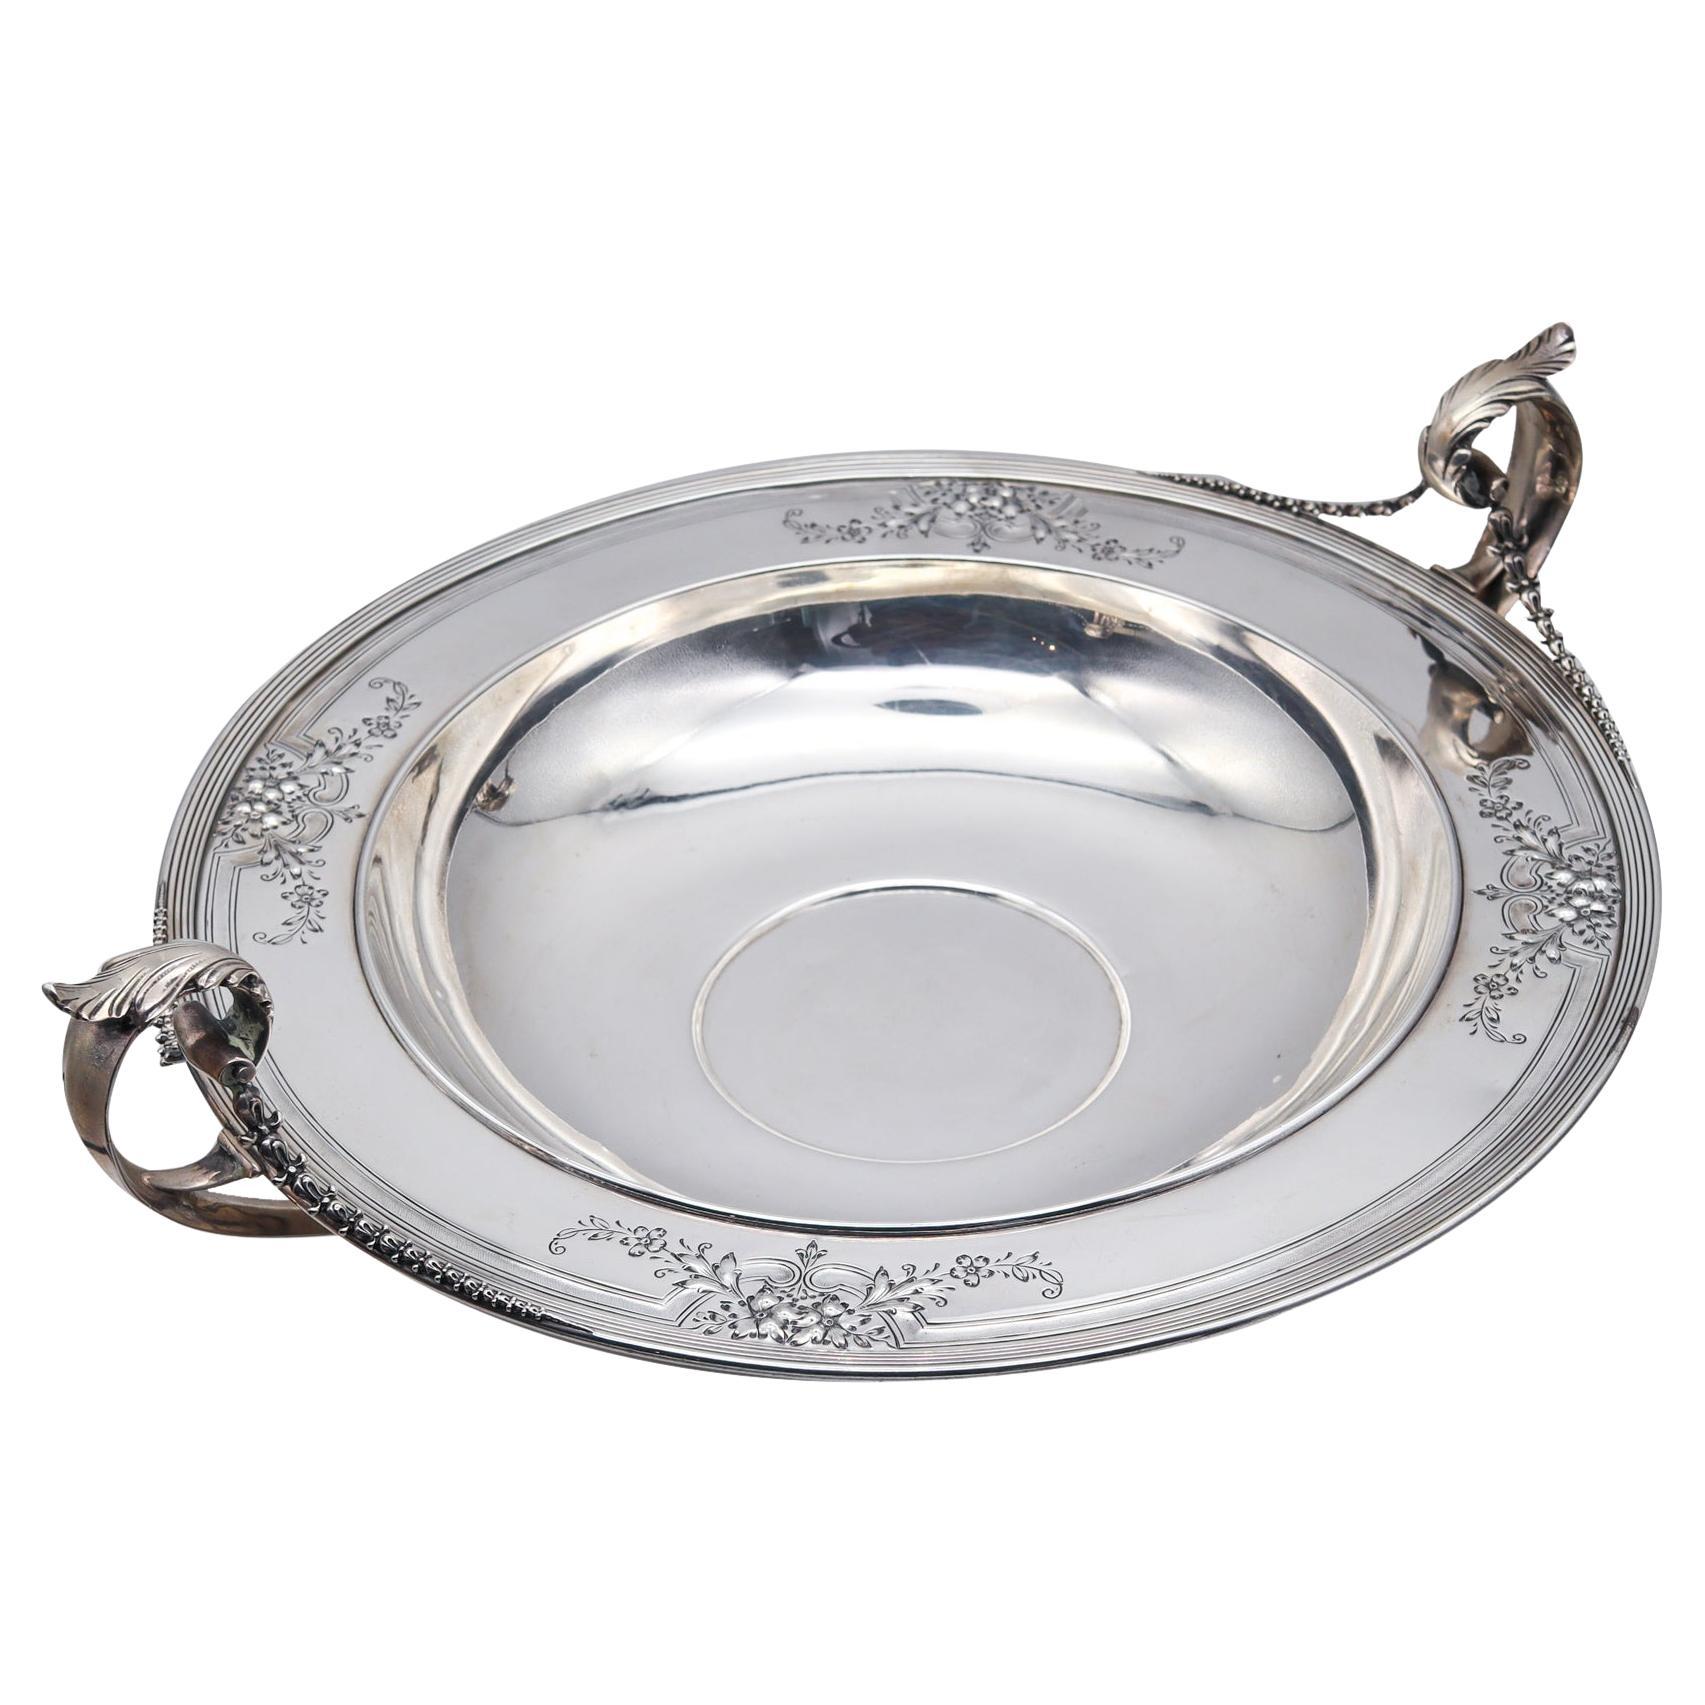 William B. Durgin Co. 1900 Edwardian Neo Classic Center Bowl 925 Sterling Silver For Sale